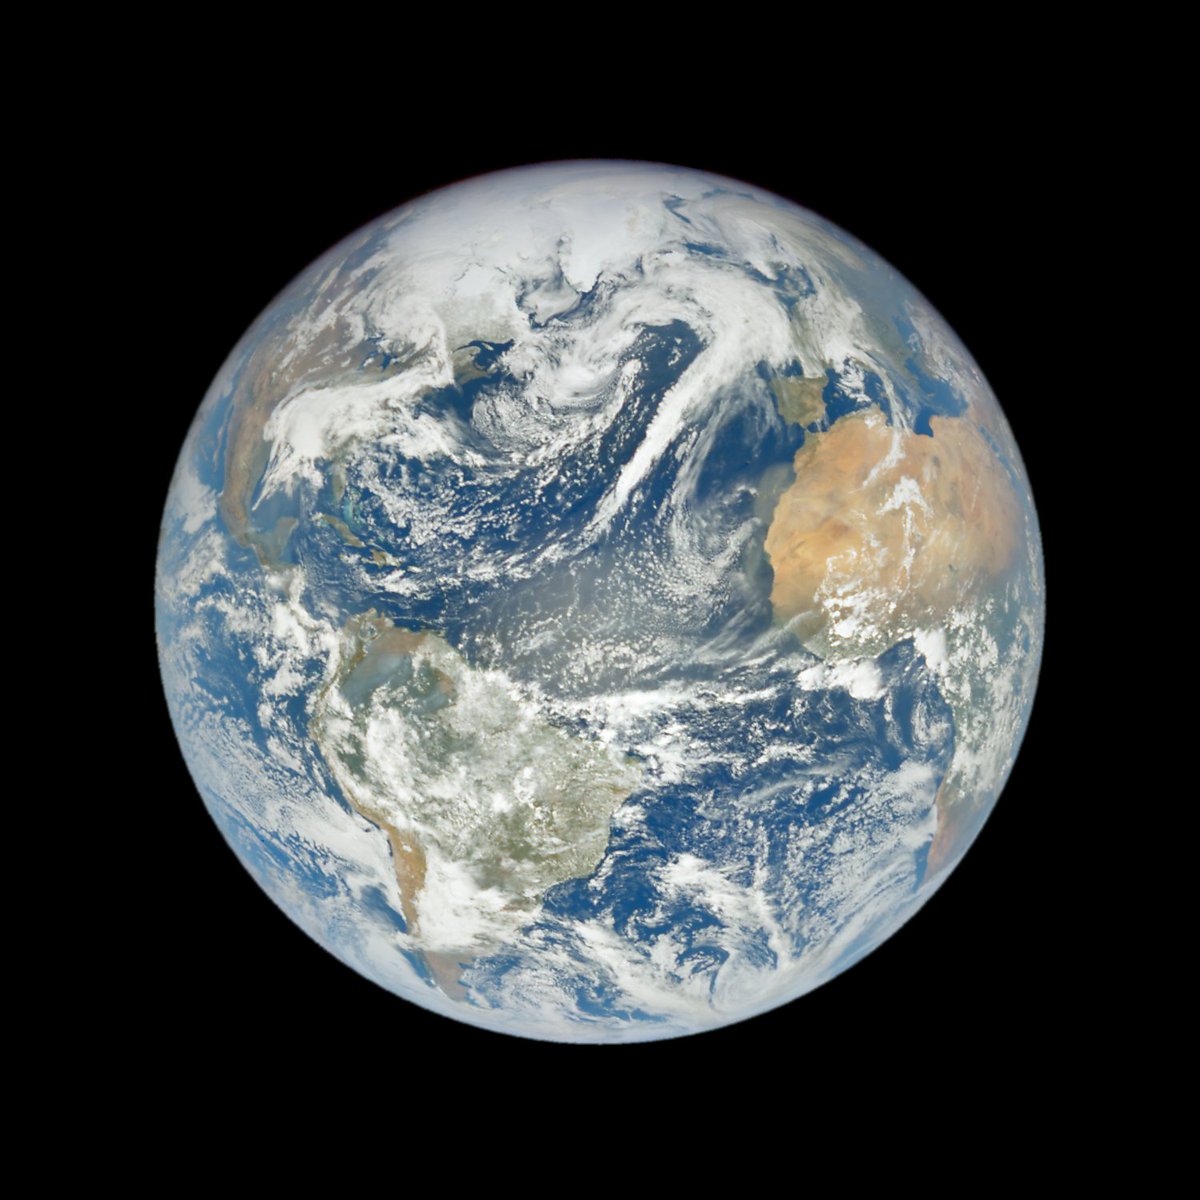 14:37 on Wednesday April 10th, over the North Atlantic Ocean